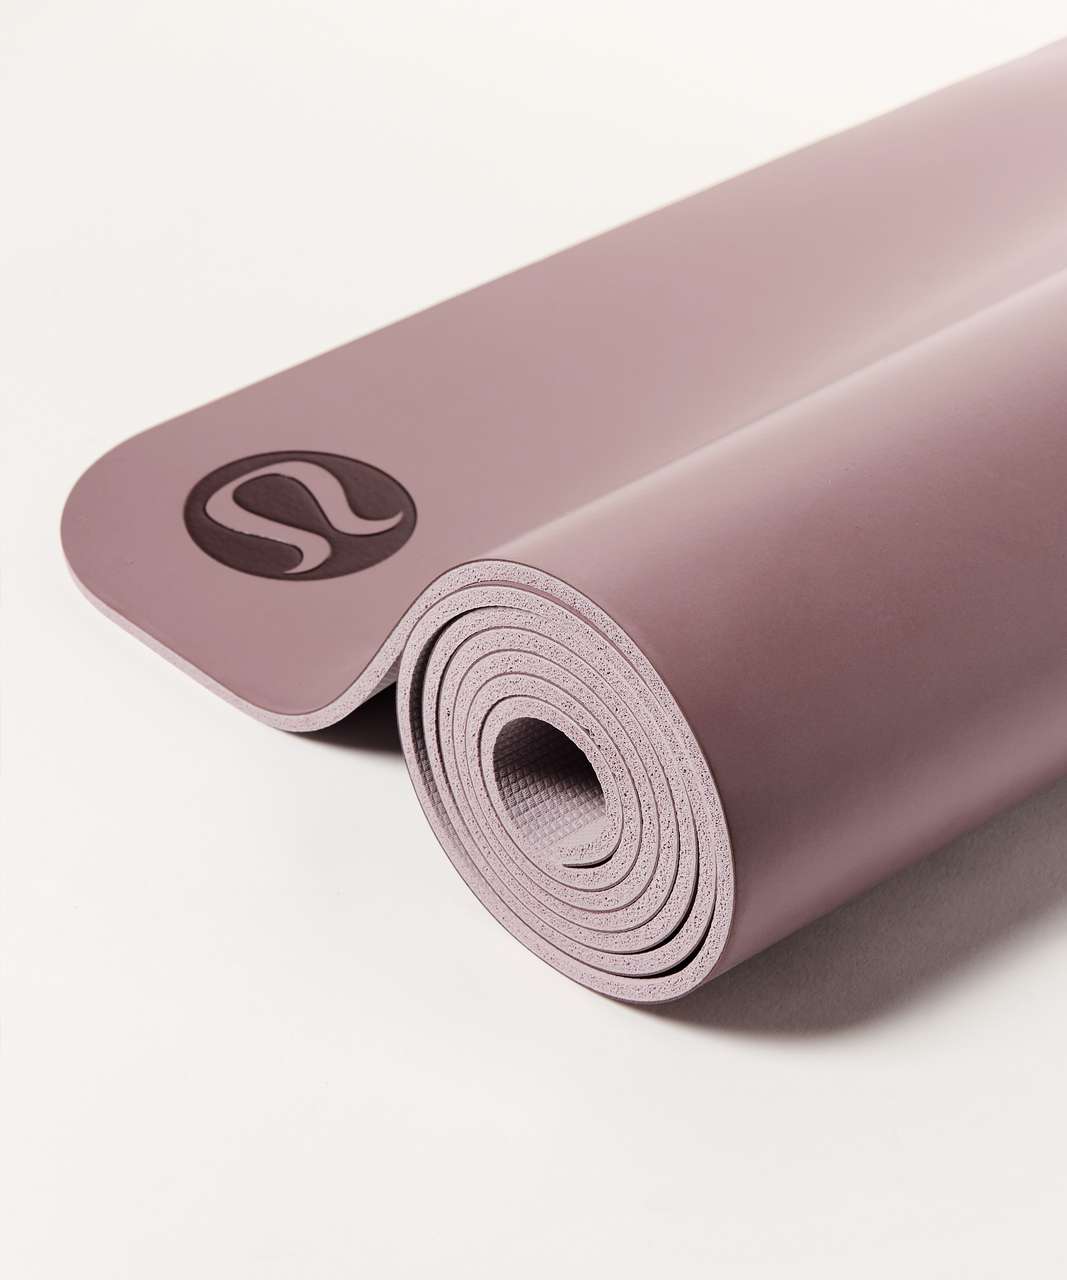 Lululemon The Reversible Mat 5mm (Taryn Toomey Collection) - Misty Mauve / Porcelain Pink